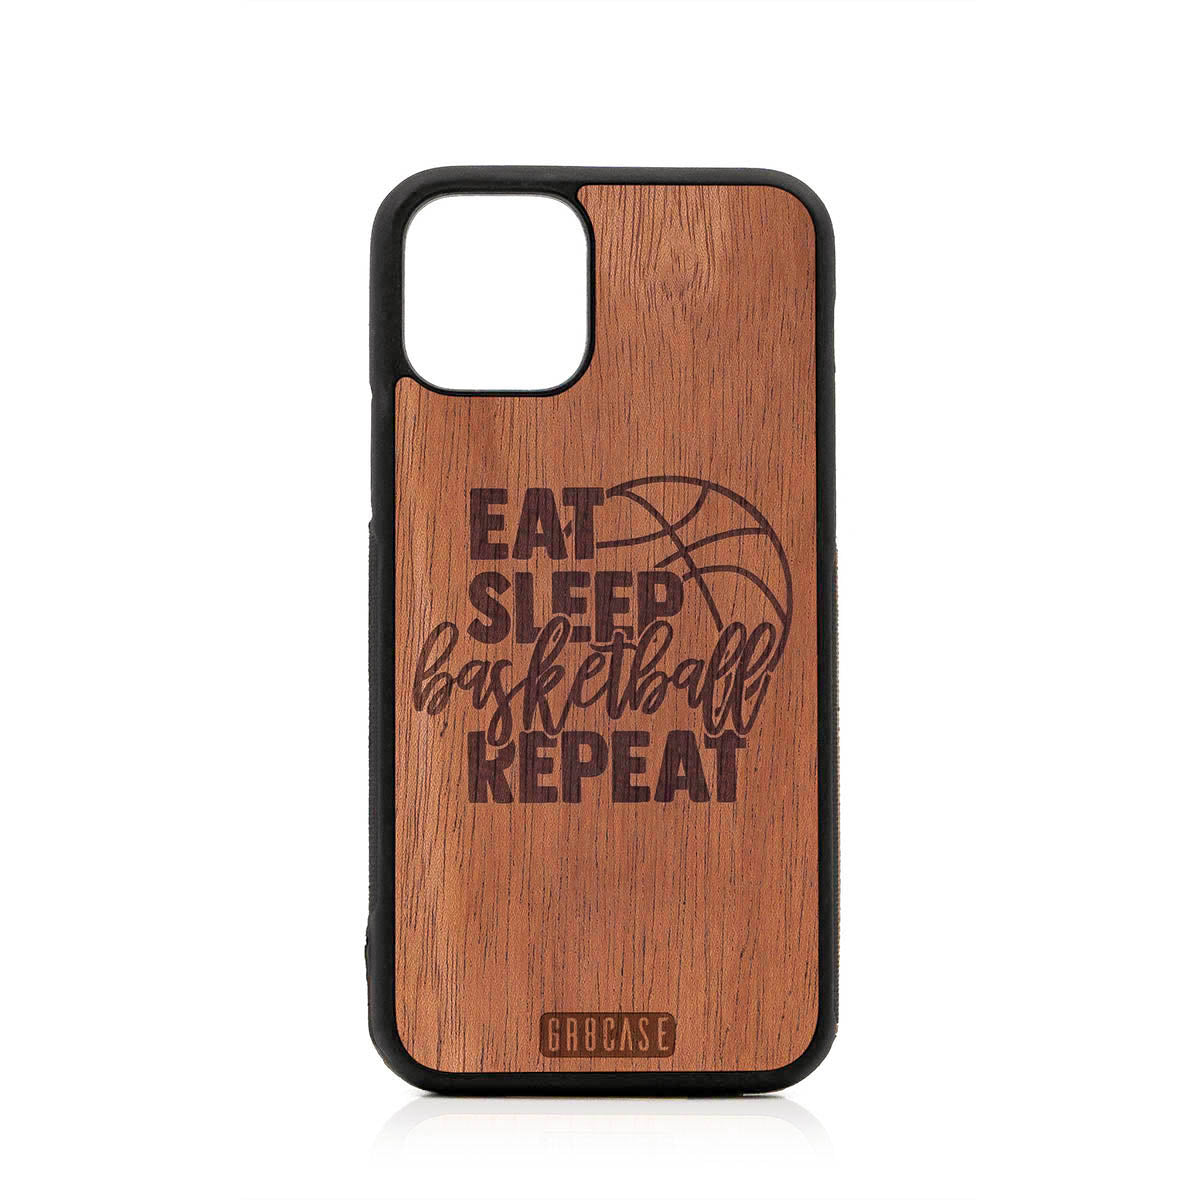 Eat Sleep Basketball Repeat Design Wood Case For iPhone 11 Pro